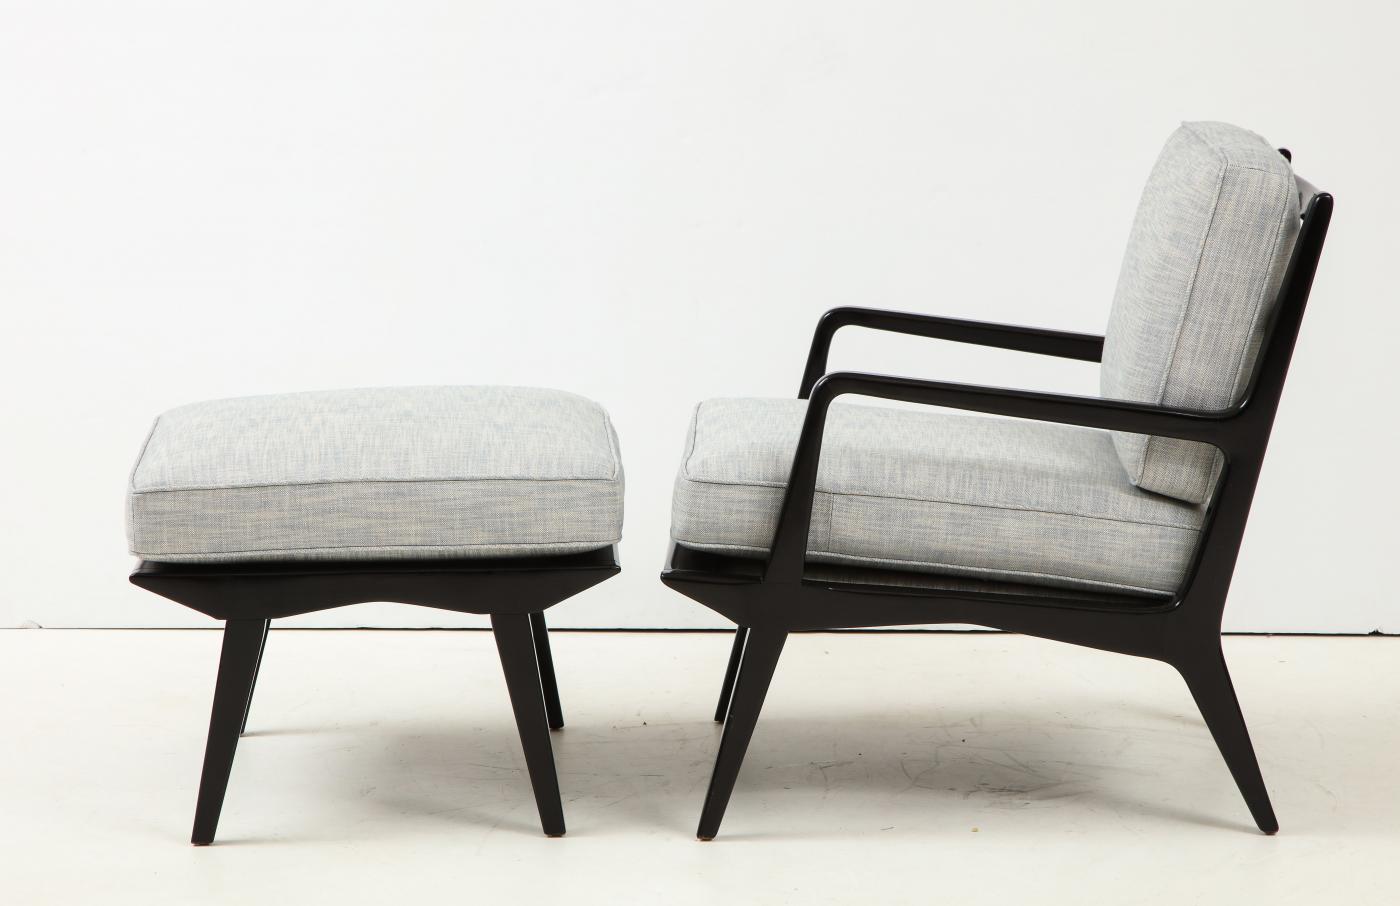 Lounge chair and ottoman. Carlo di Carli for M. Singer & Sons